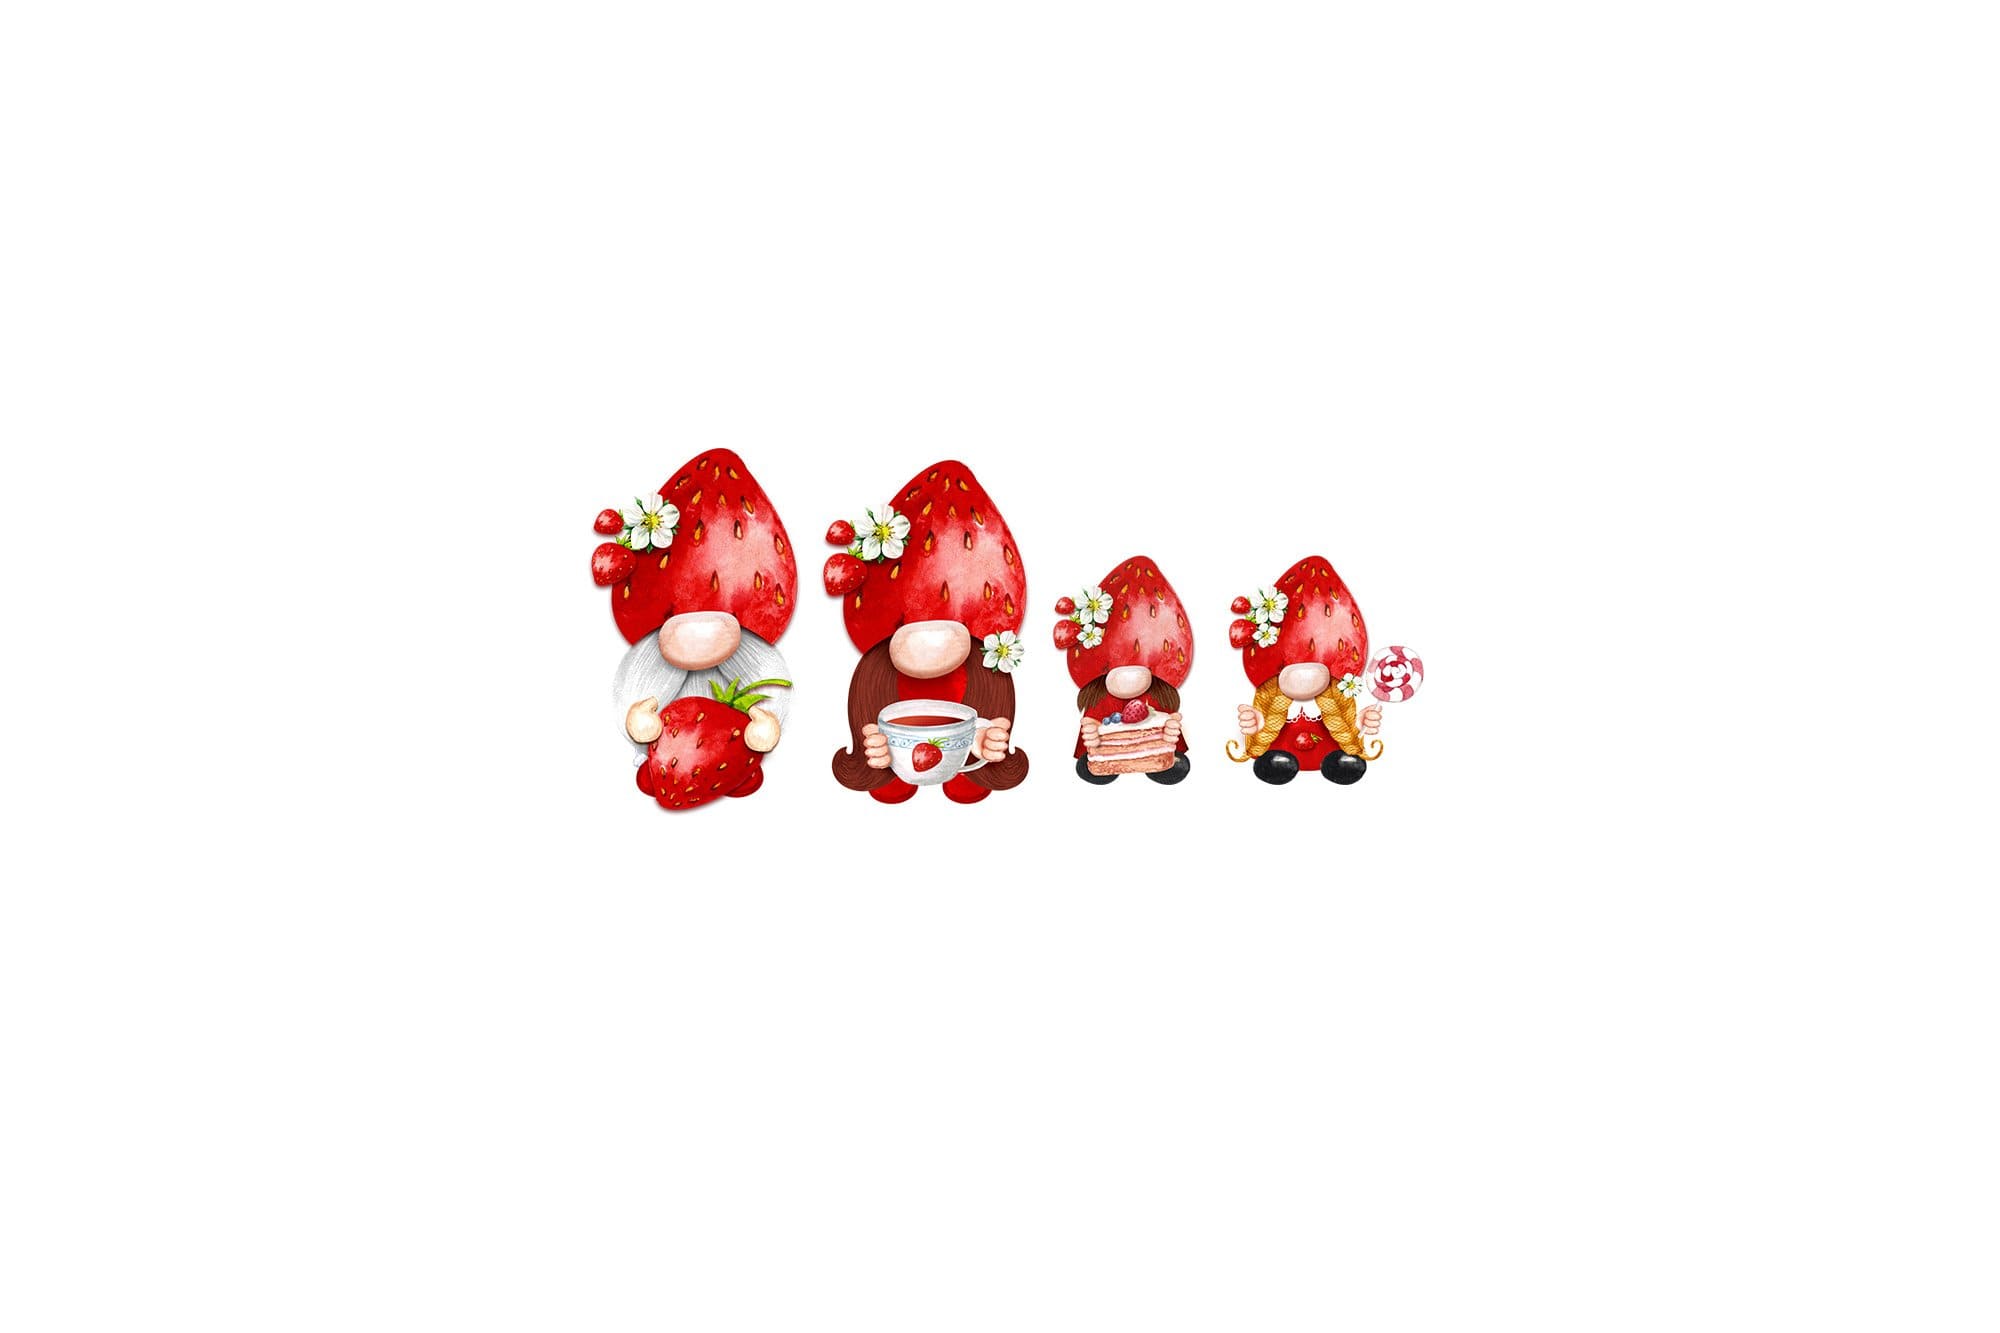 Image of a family of gnomes wearing strawberry hats on the white background.